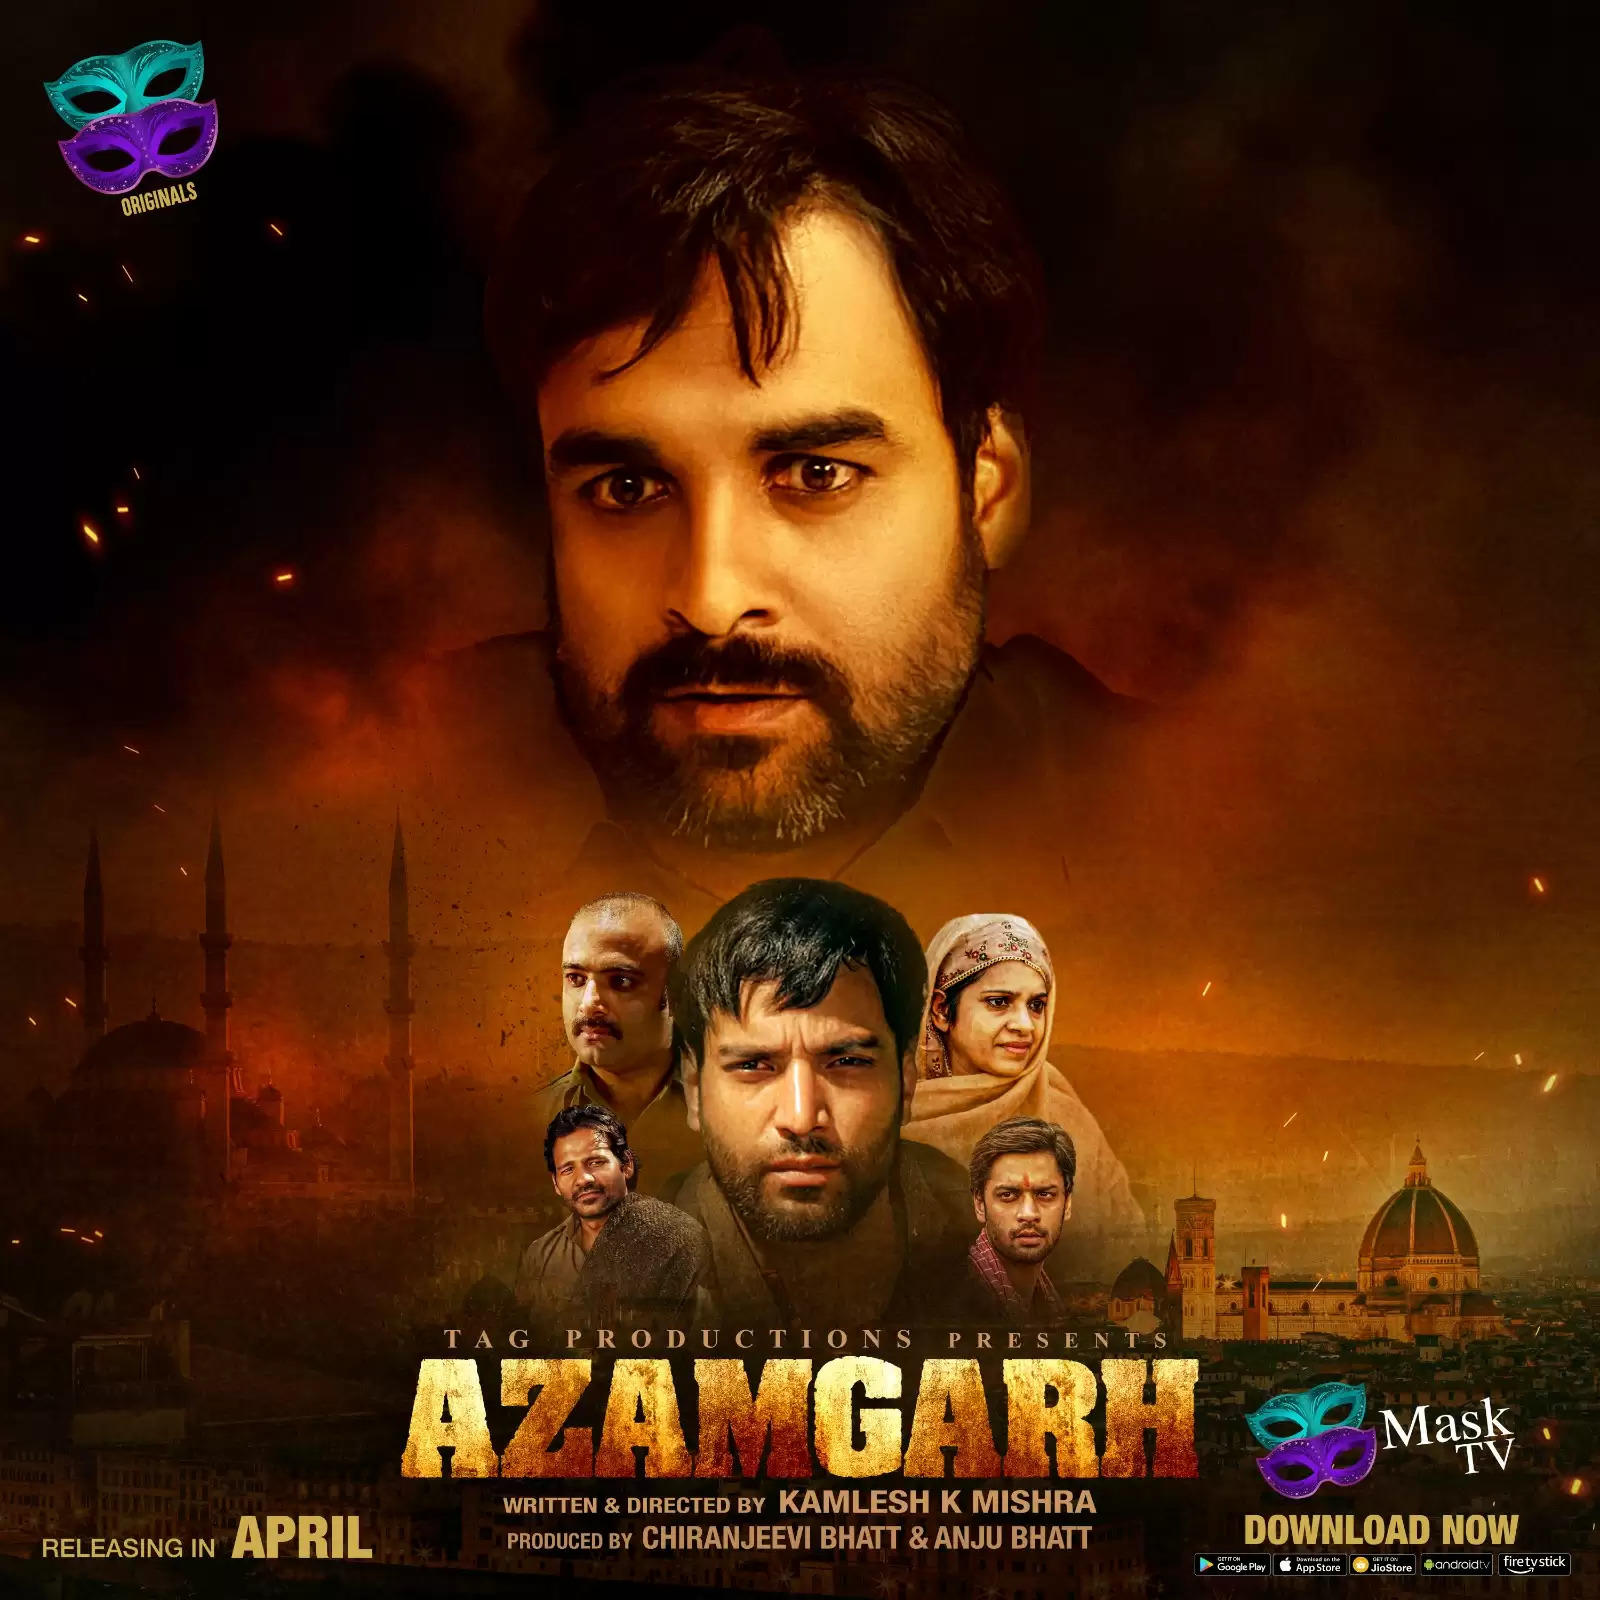 Mask tv releases AZAMGARH film’s one more trailer followed by an April streaming